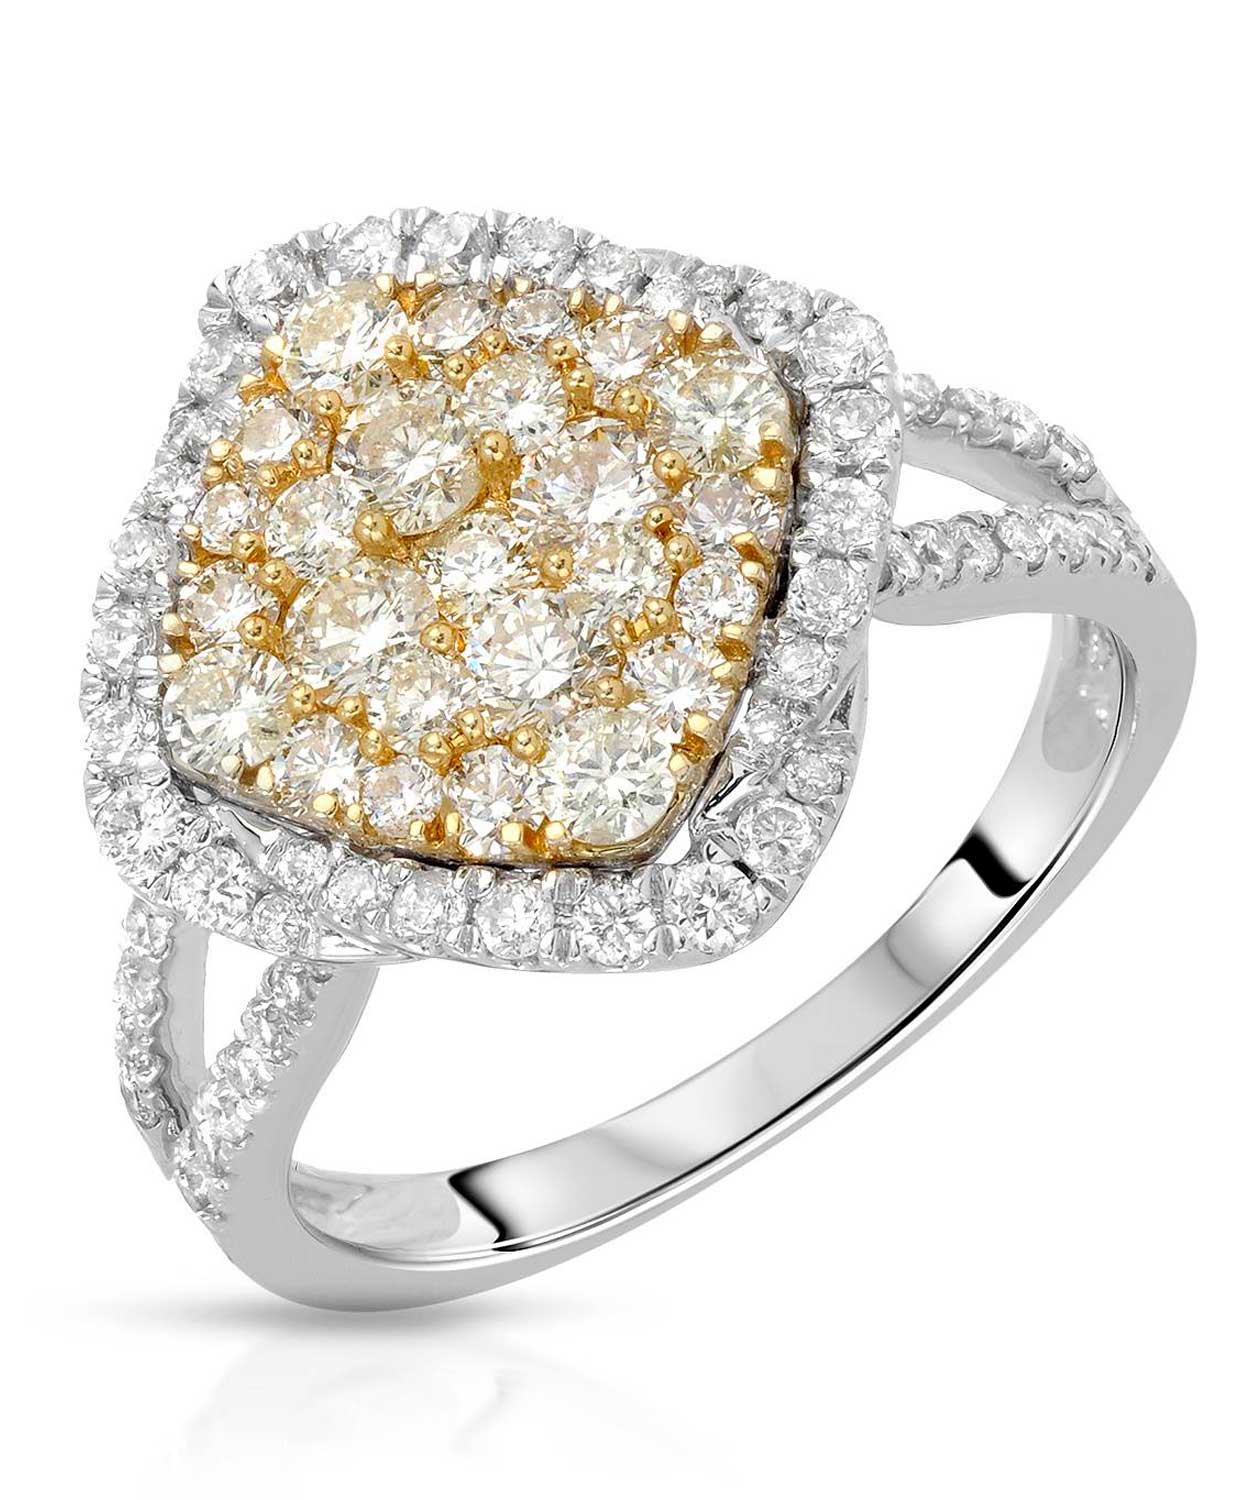 Signature Collection 1.46 ctw Fancy Yellow Diamond 14k Gold Cluster Right Hand Ring View 1